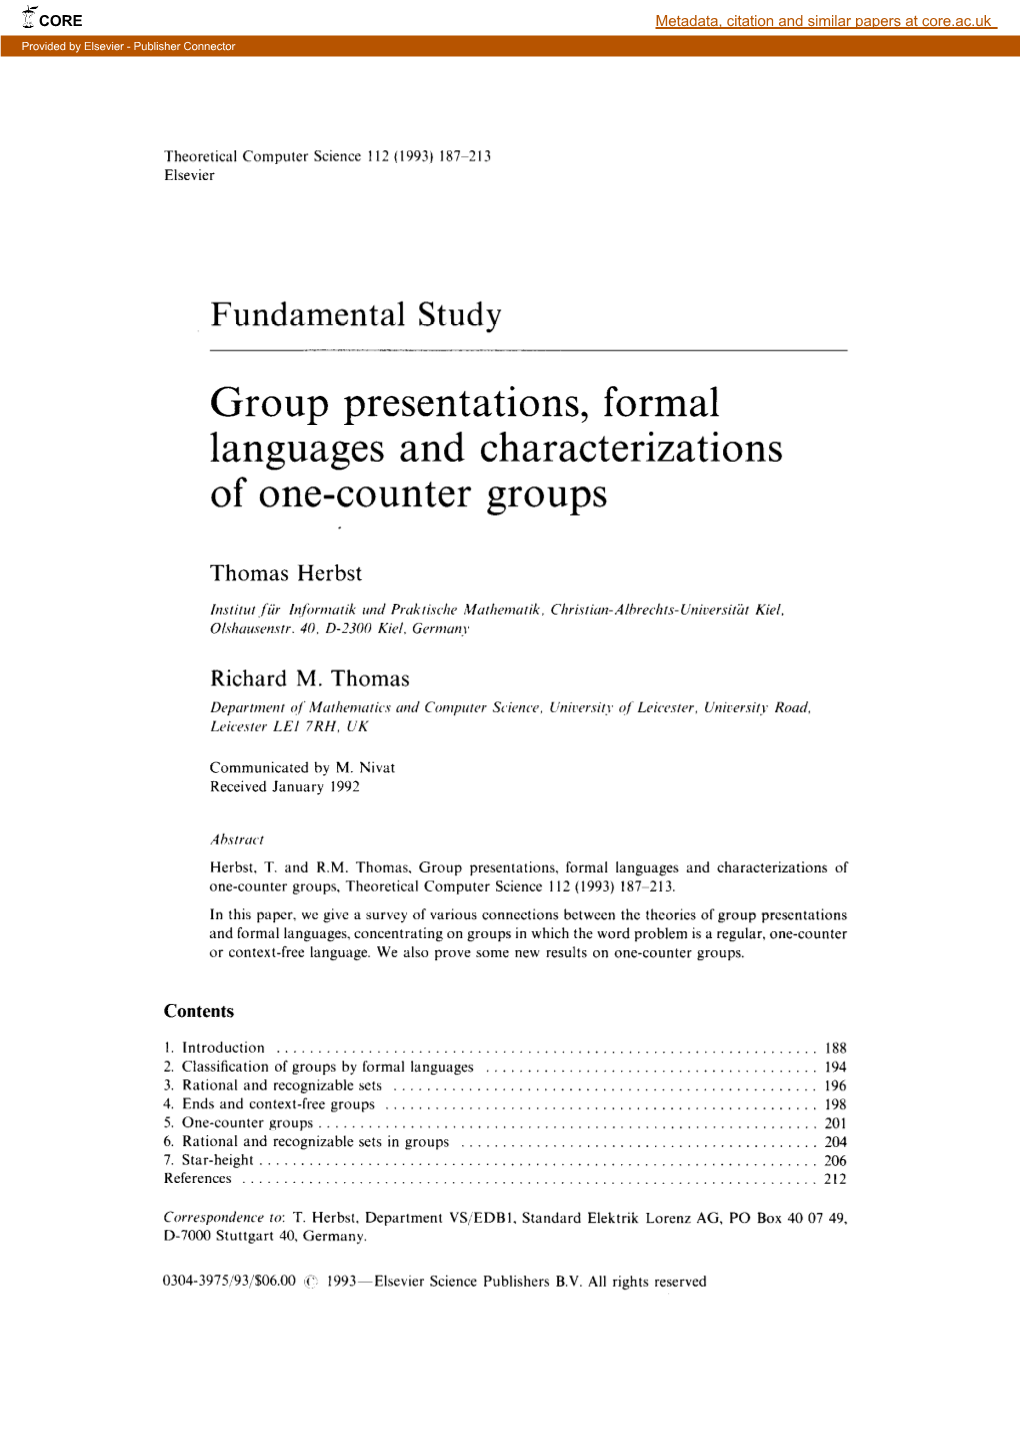 Group Presentations, Formal Languages and Characterizations of One-Counter Groups